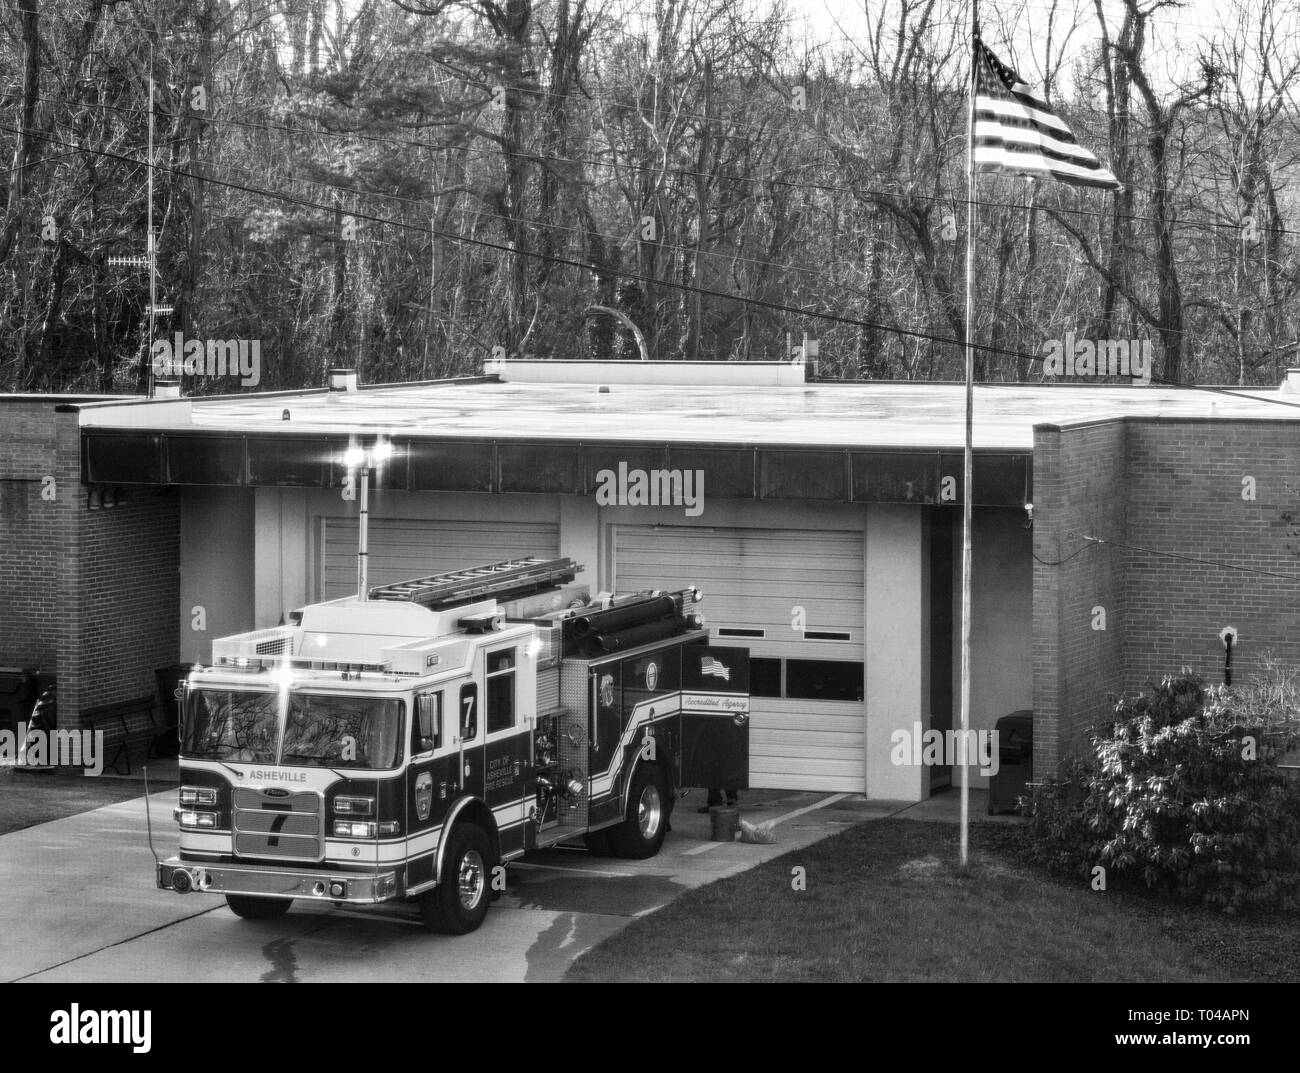 Engine #7 is readied for action in the early morning at a fire station in Asheville, North Carolina, USA Stock Photo